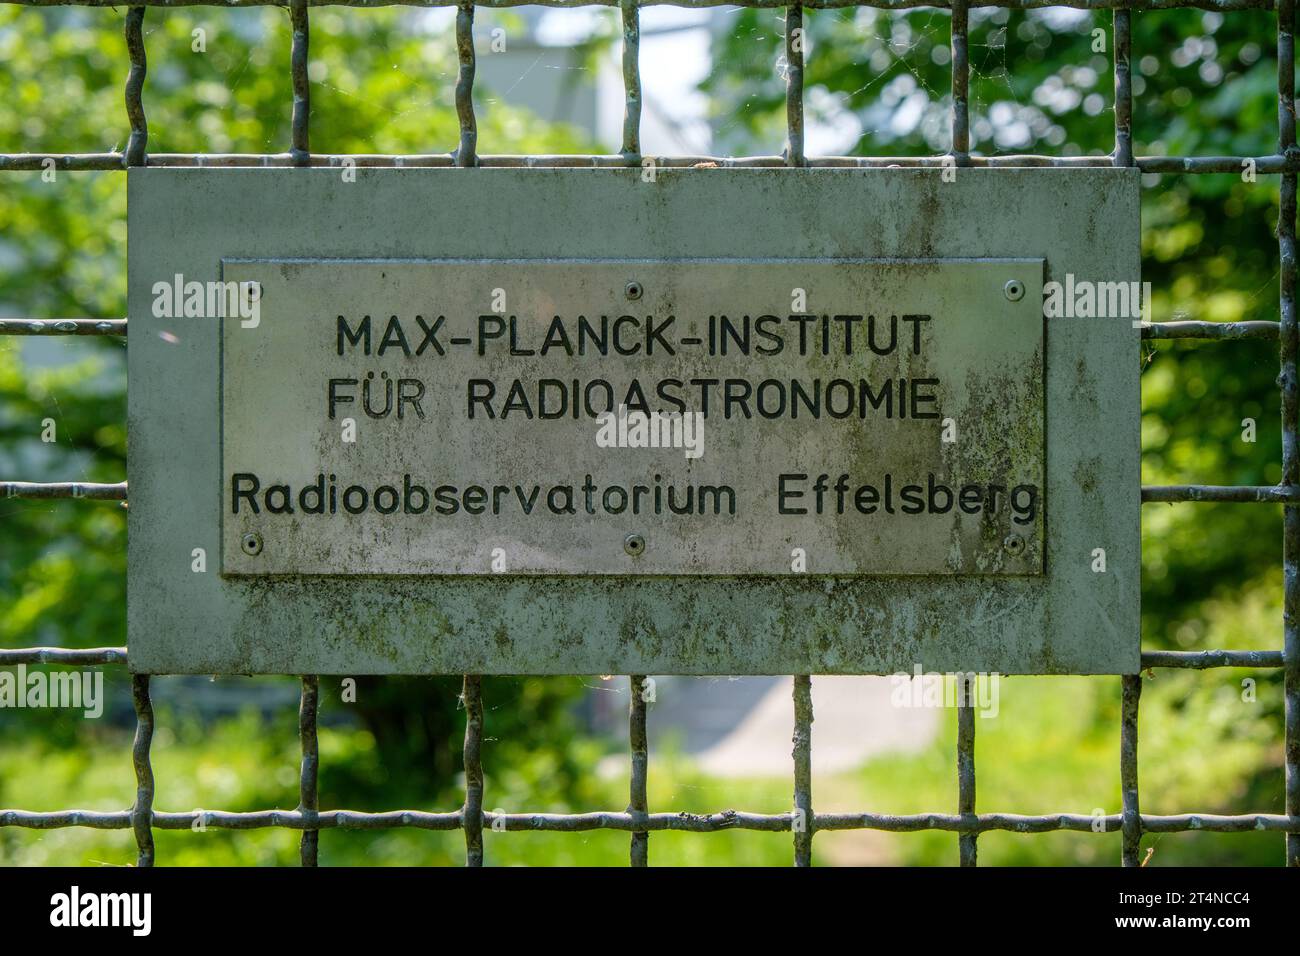 Signage at the fence of the Max-Planck-Institut für Radioastronomie (institute for radio astronomy) in Effelsberg, Germany Stock Photo